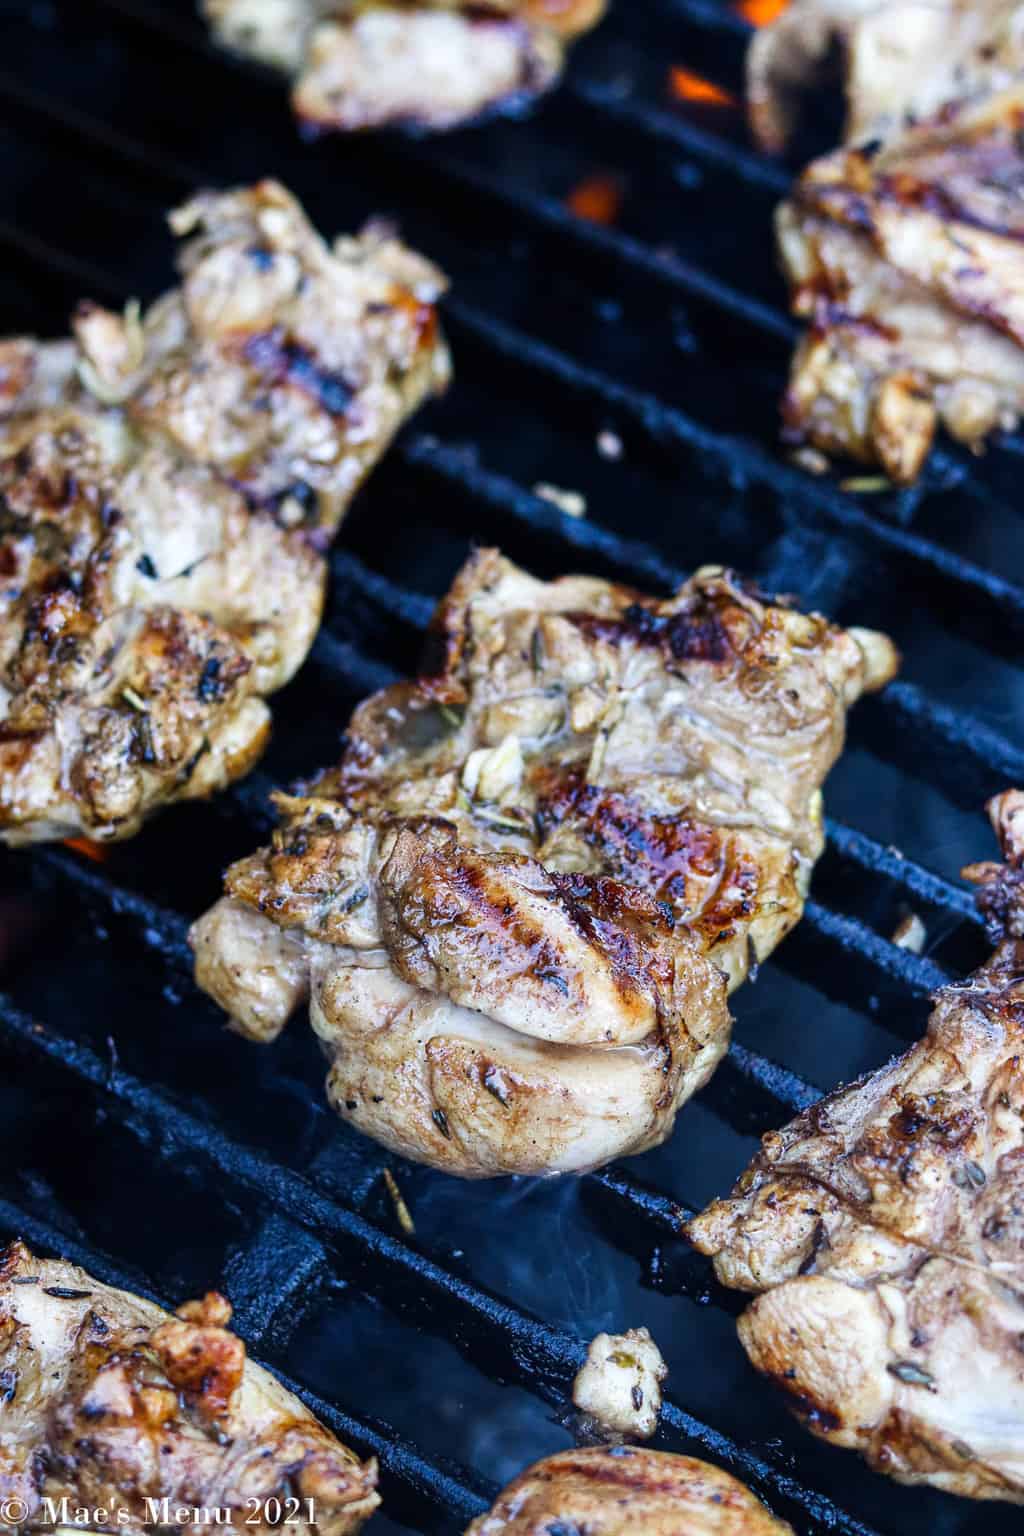 Grilled chicken thighs on the grill